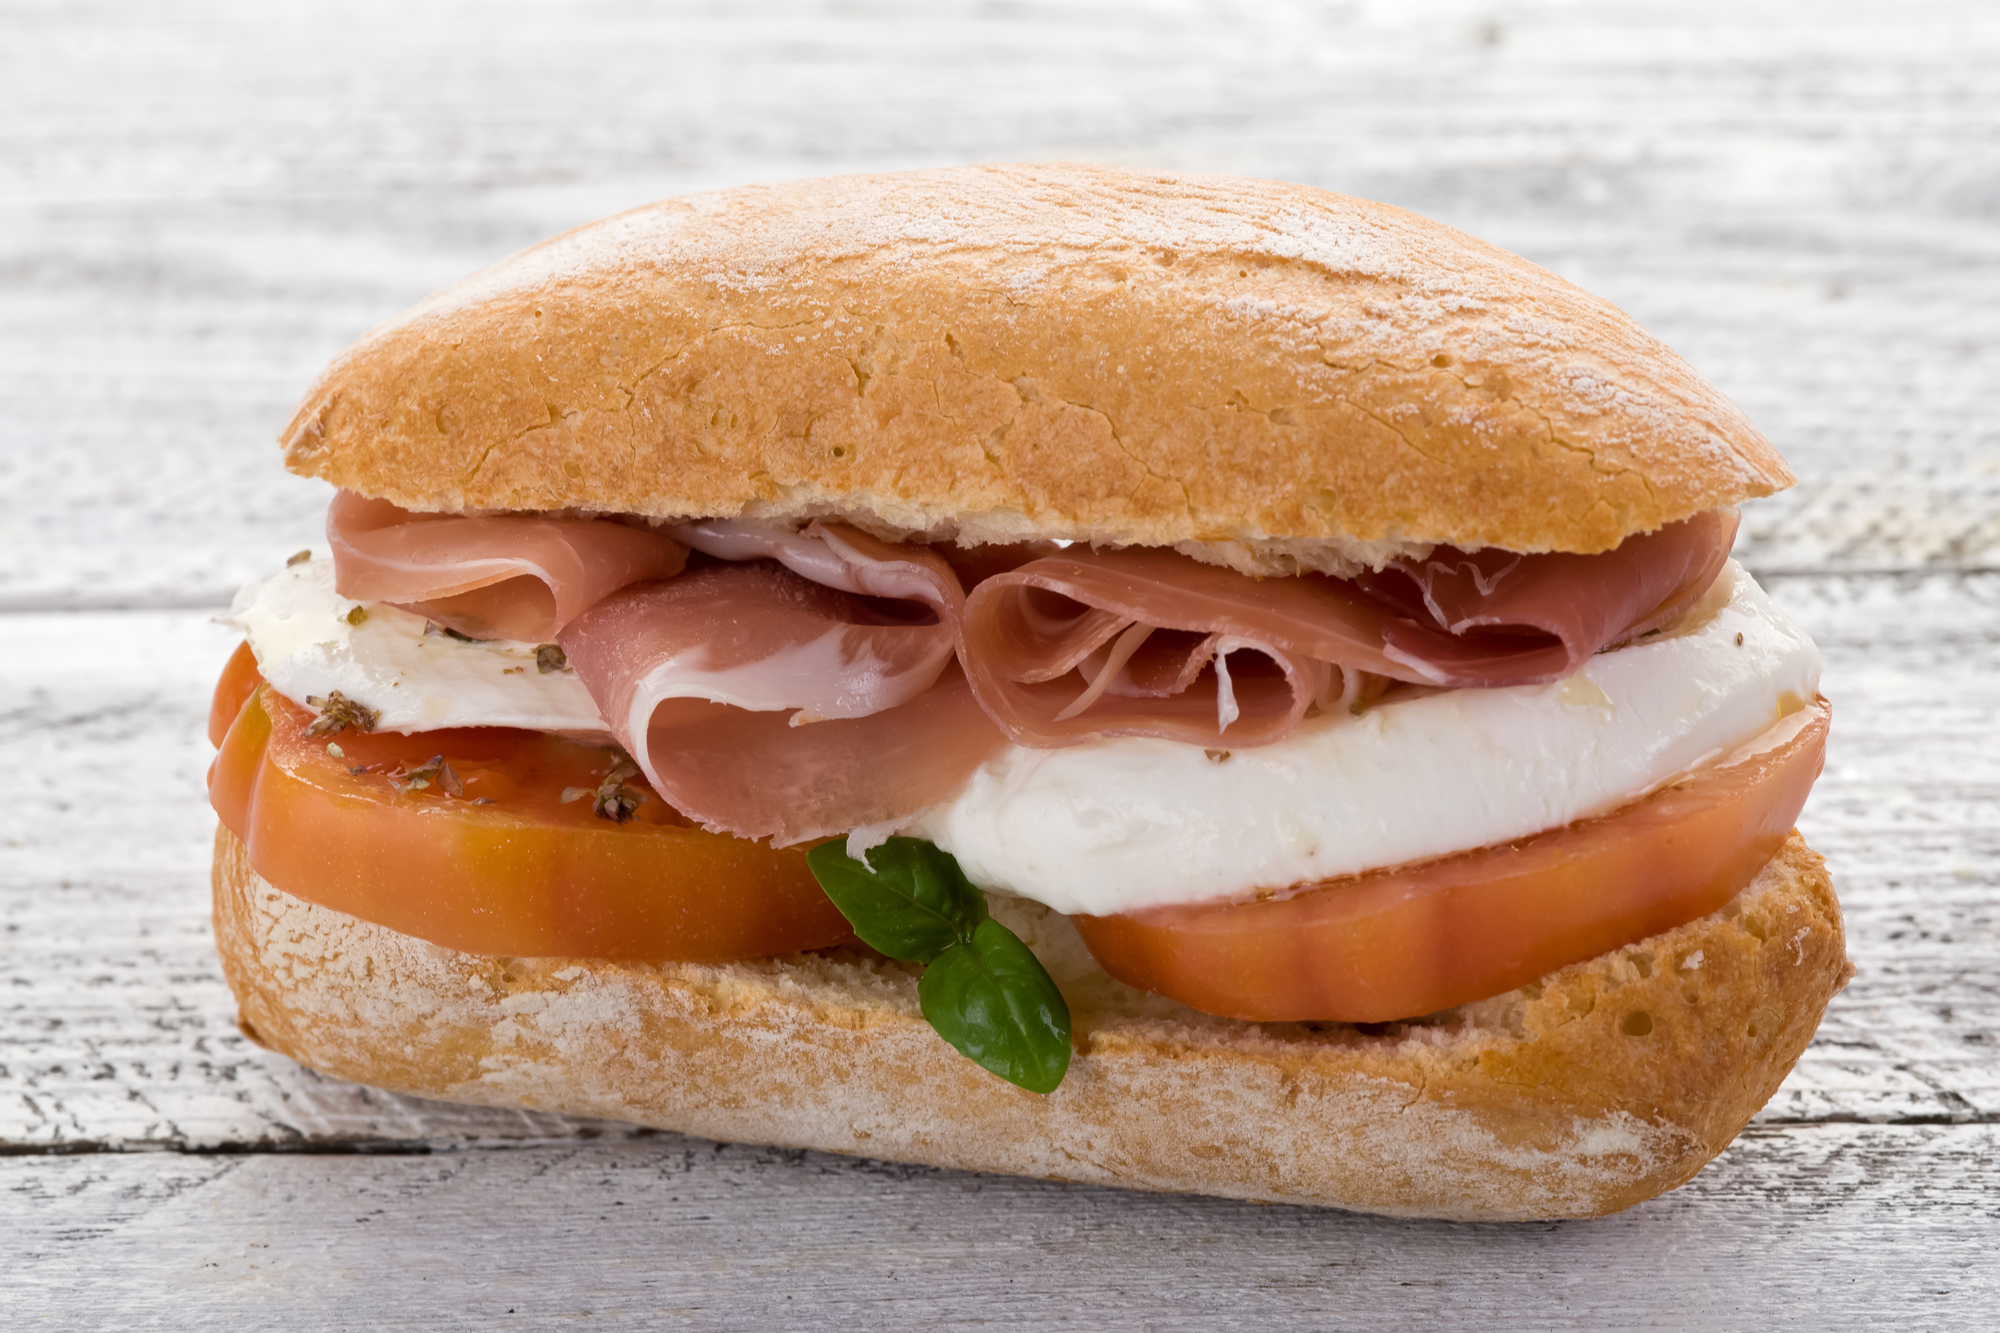 Sub vs. Sandwich: What Is the Difference?